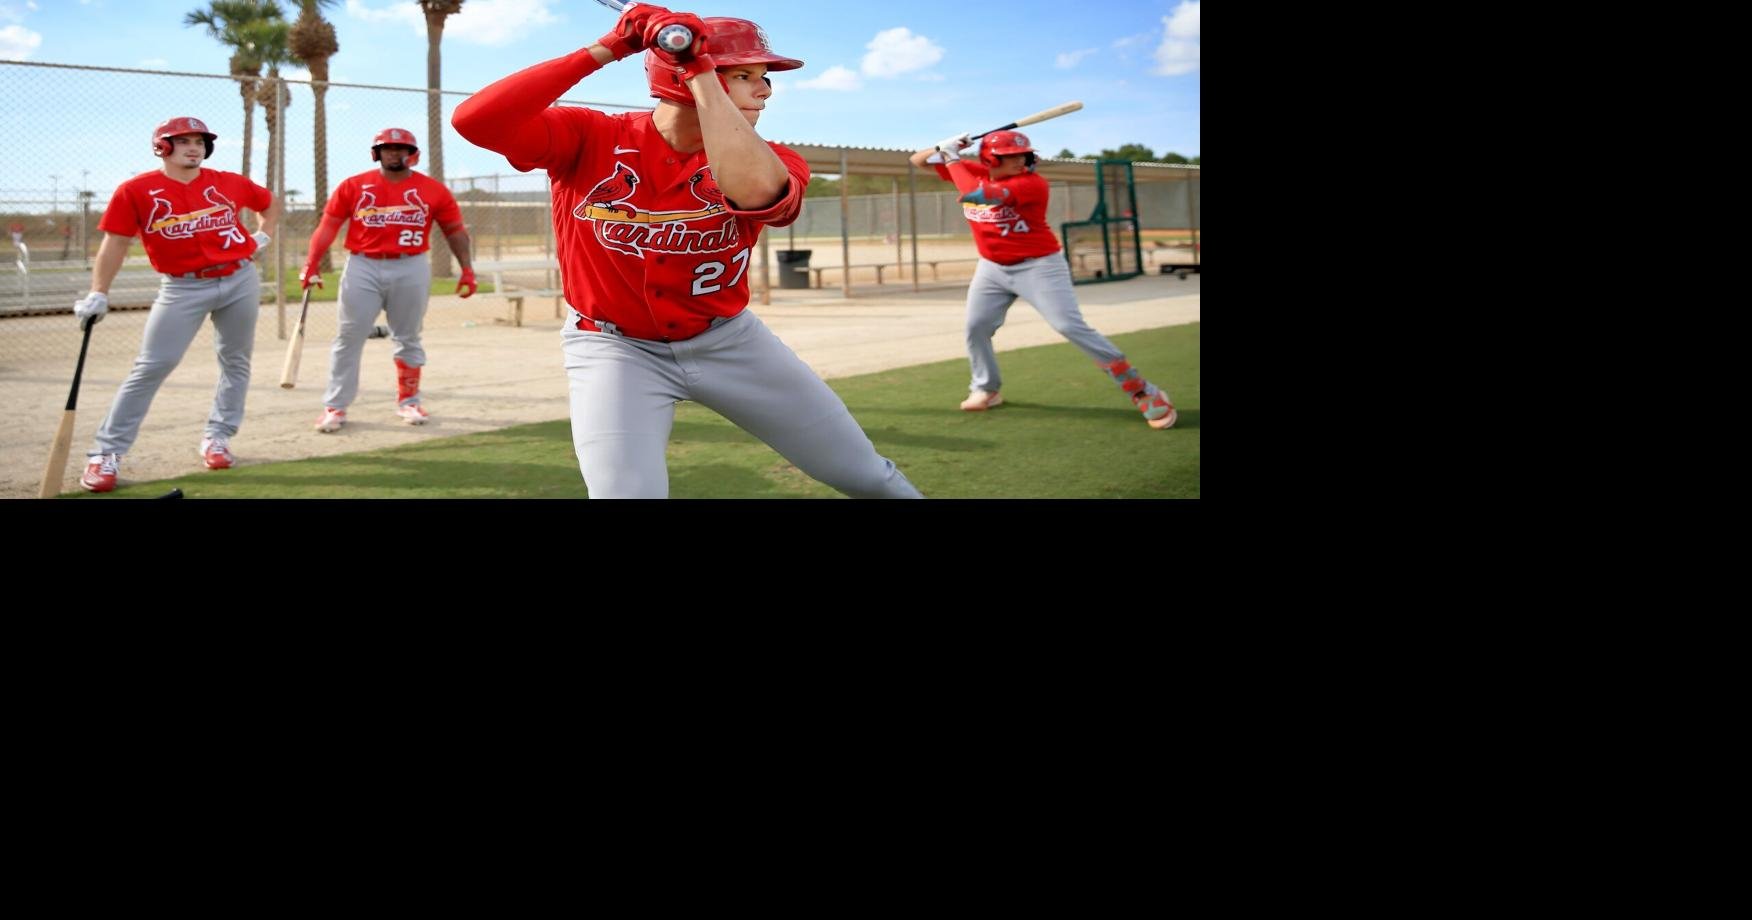 Scenes from Cardinals spring training workouts full-squad workouts